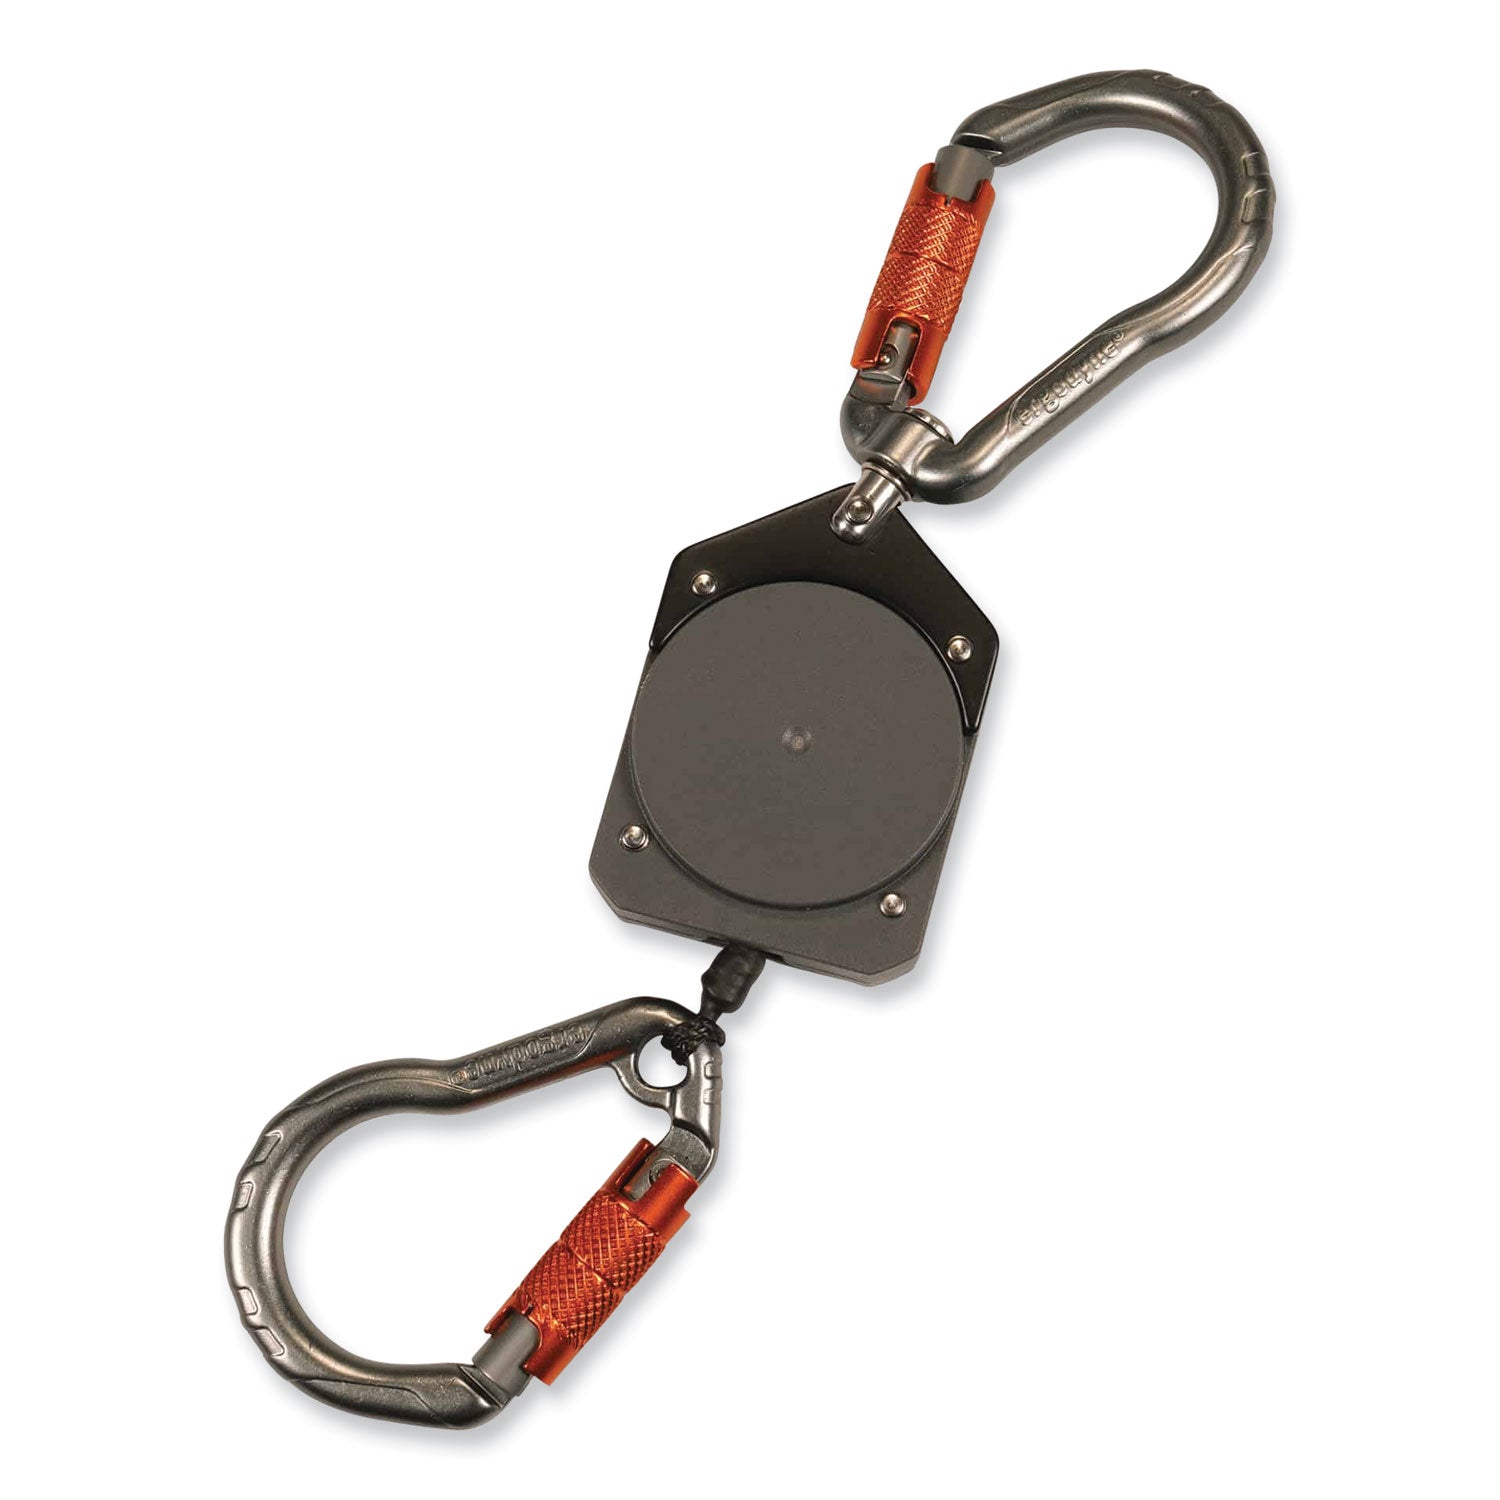 squids-3003-retractable-lanyard-with-two-carabiners-2-lb-max-working-capacity-8-to-48-gray-ships-in-1-3-business-days_ego19303 - 2